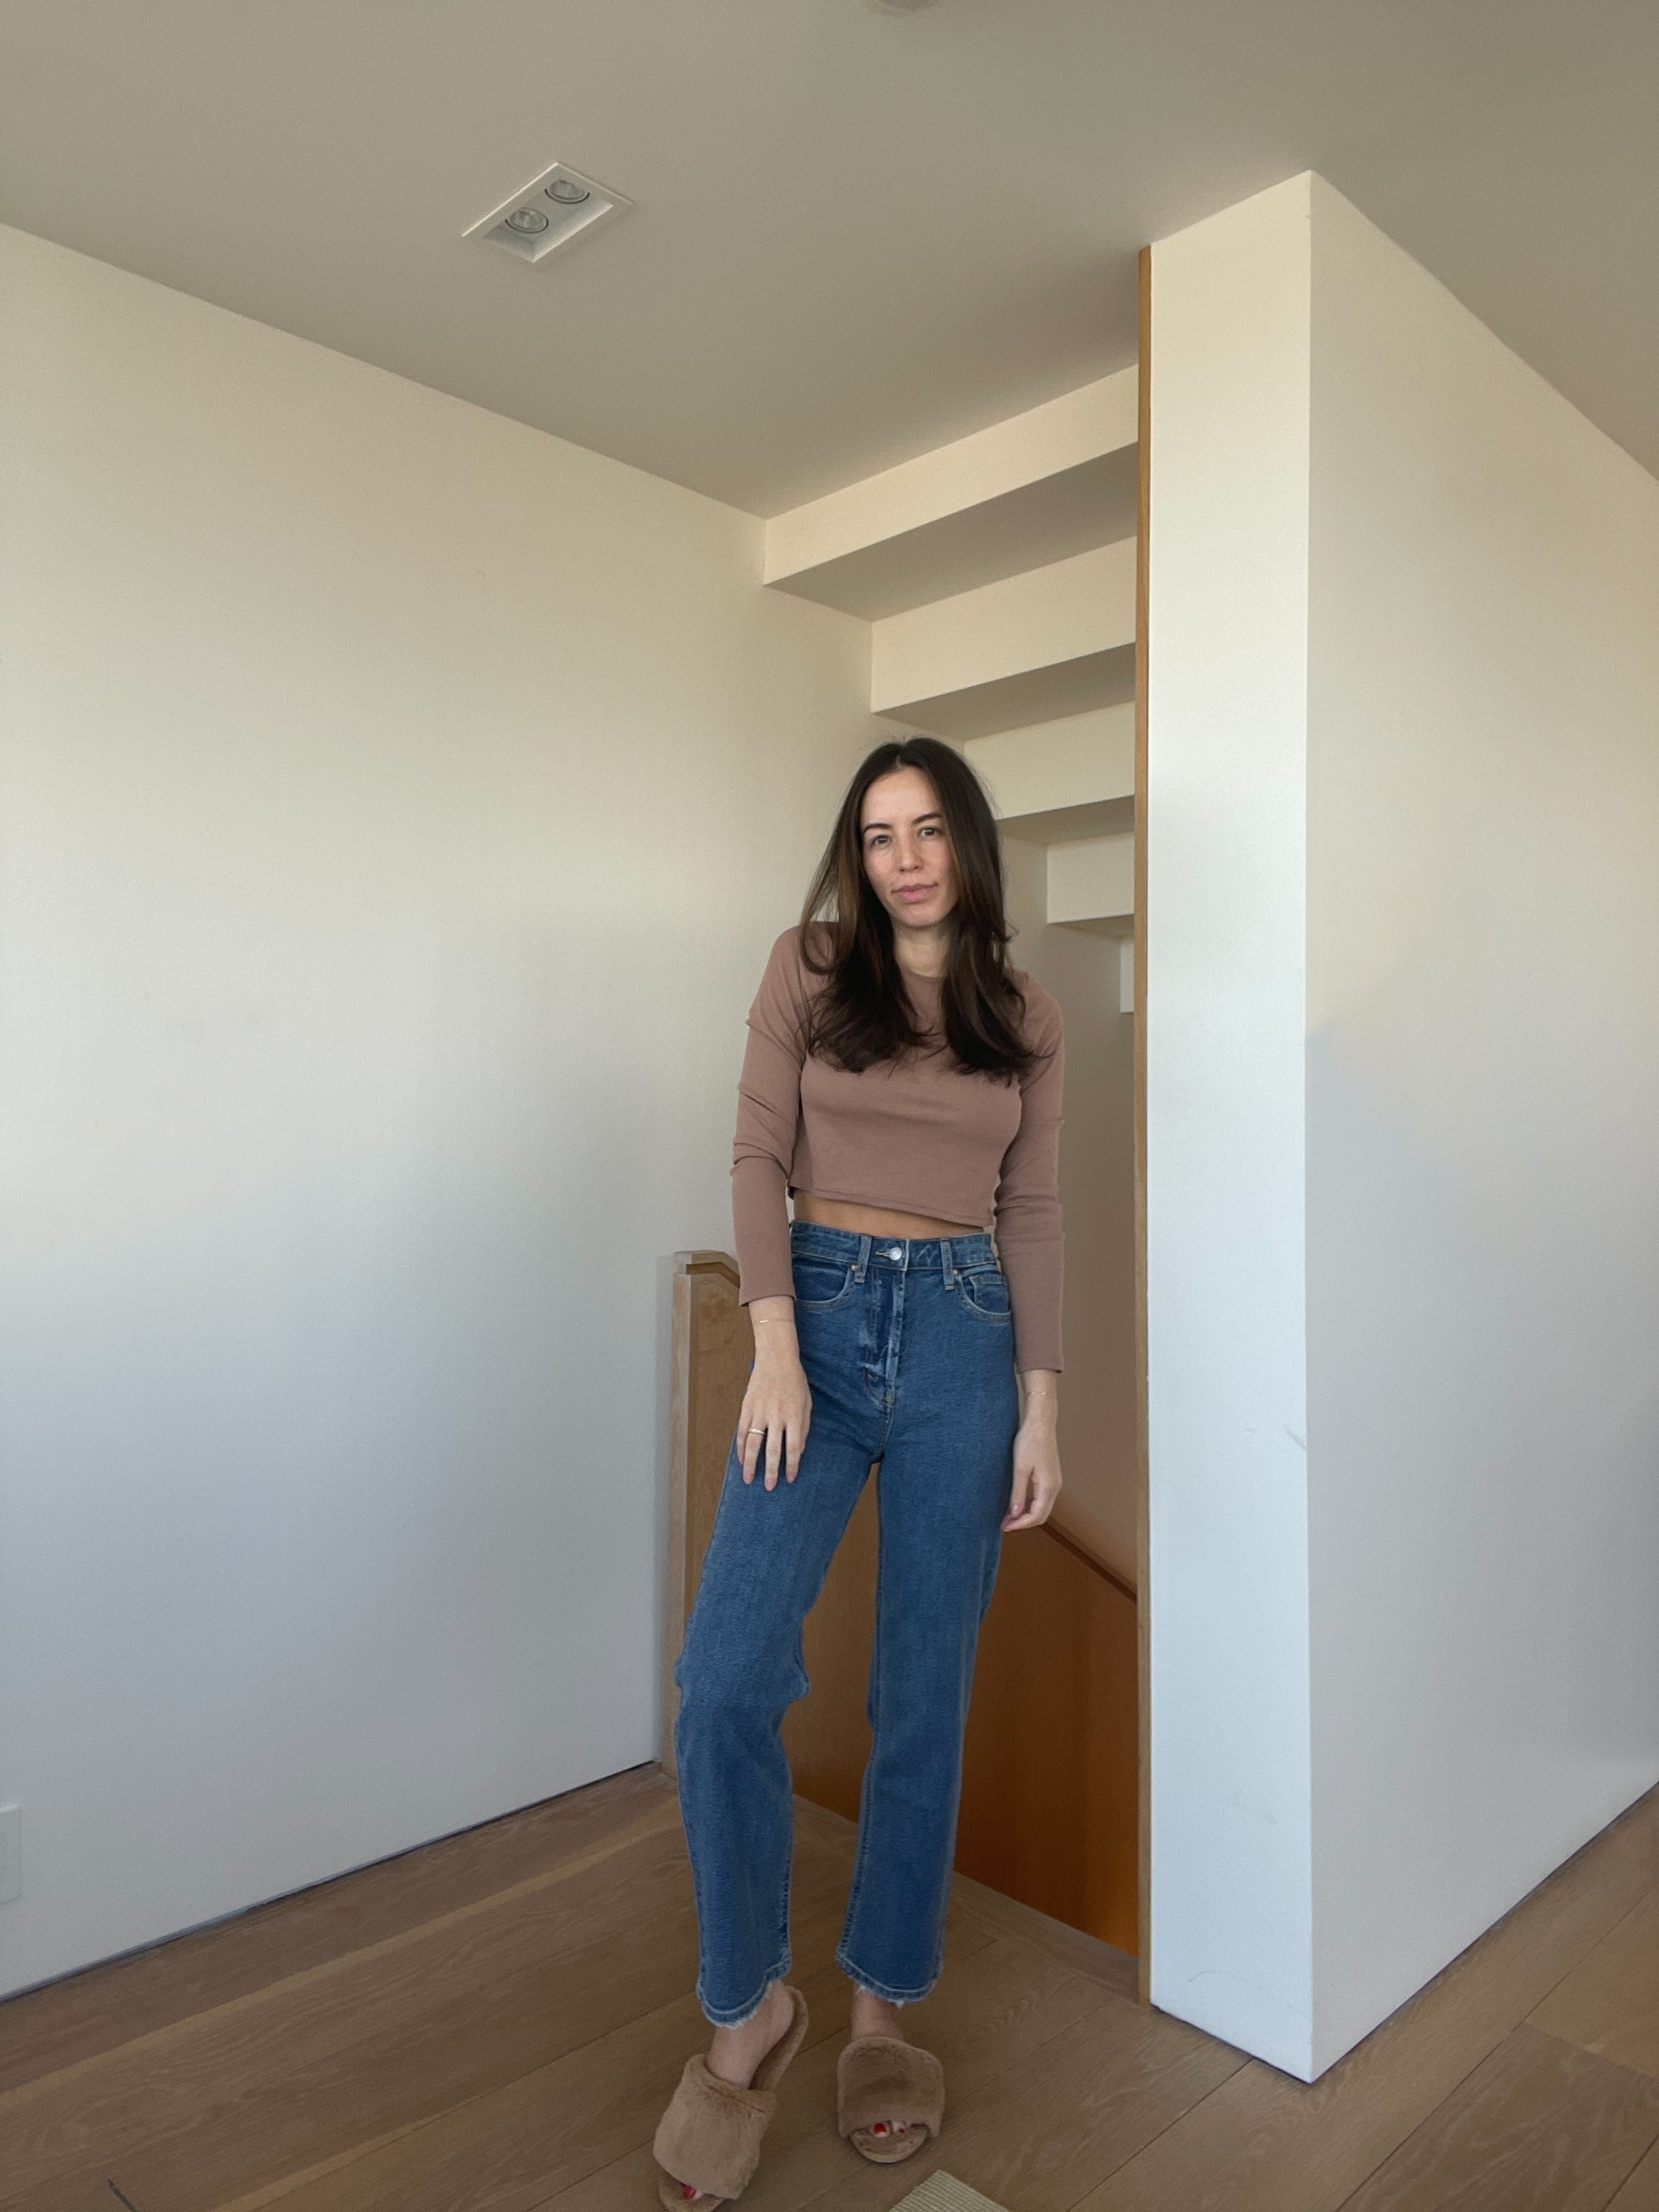 These $25 Jeans From Target Are Getting So Much Love on TikTok